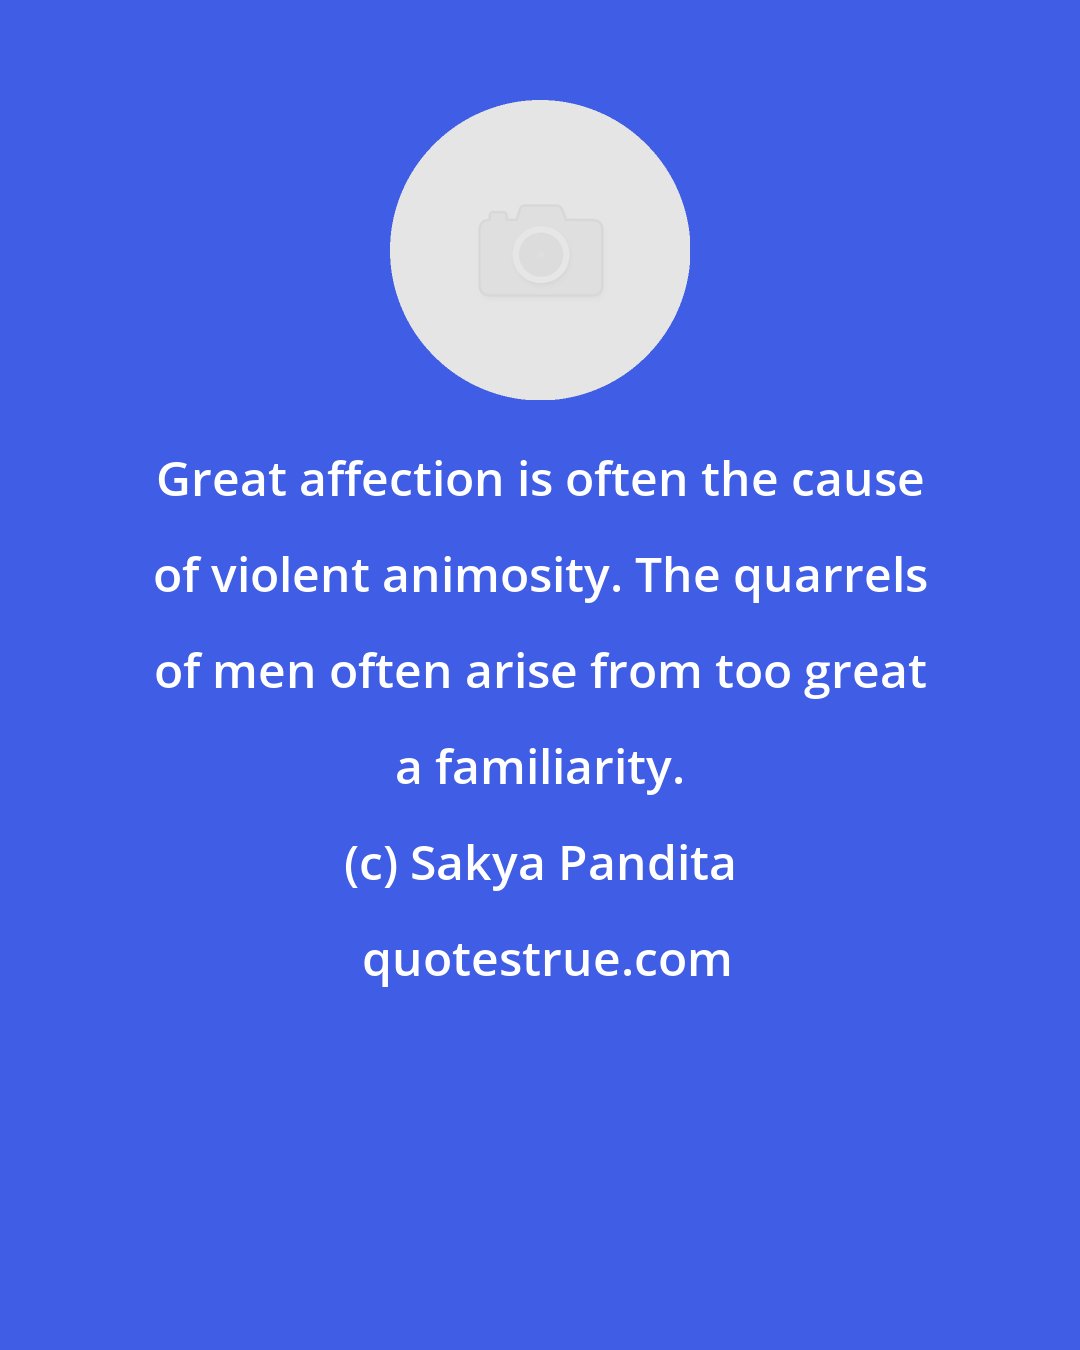 Sakya Pandita: Great affection is often the cause of violent animosity. The quarrels of men often arise from too great a familiarity.